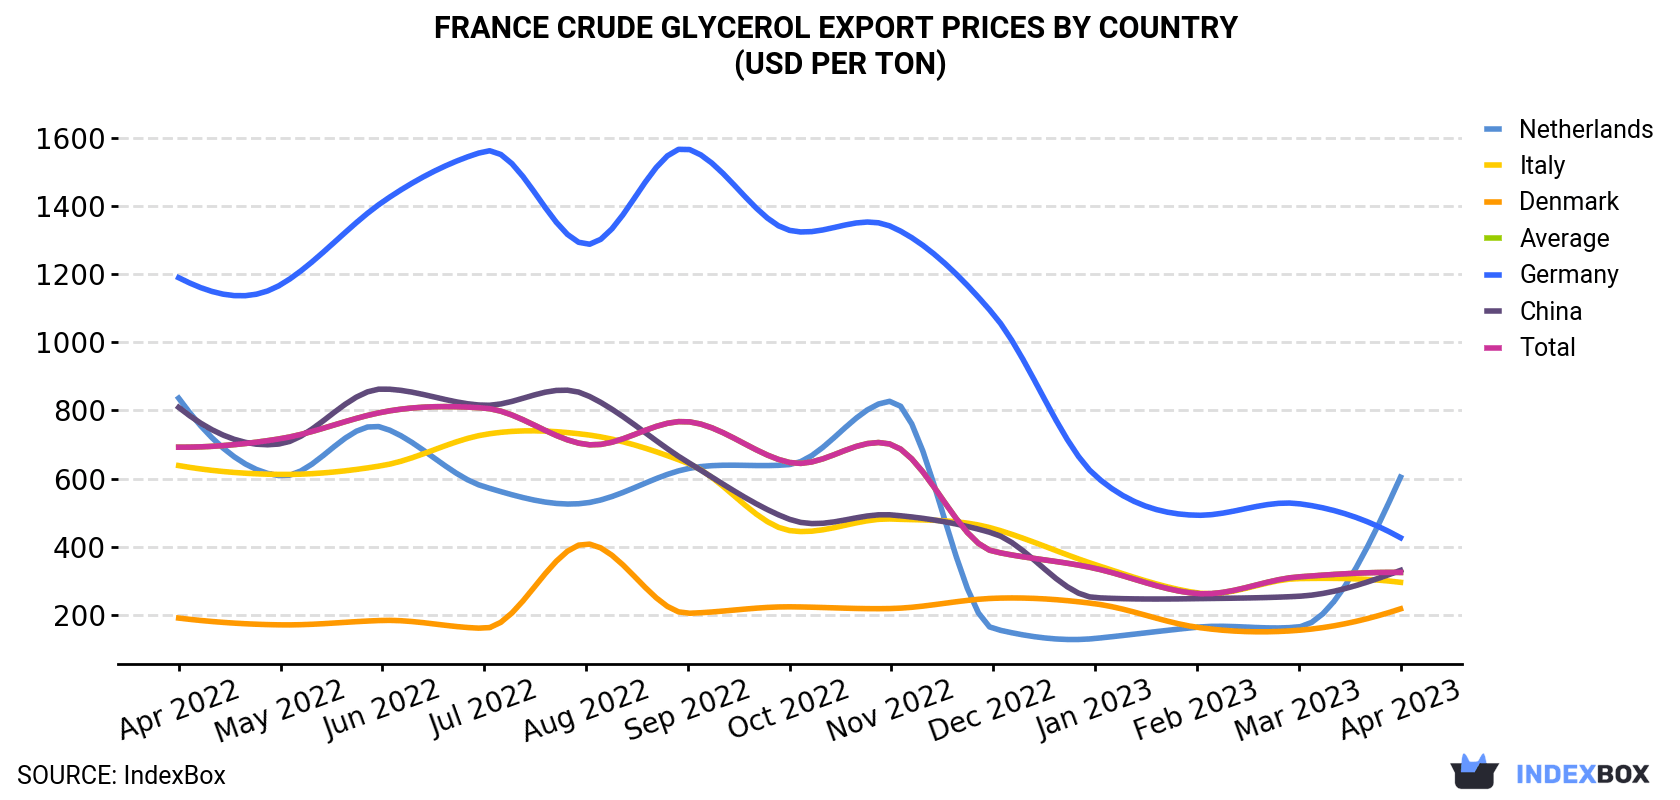 France Crude Glycerol Export Prices By Country (USD Per Ton)